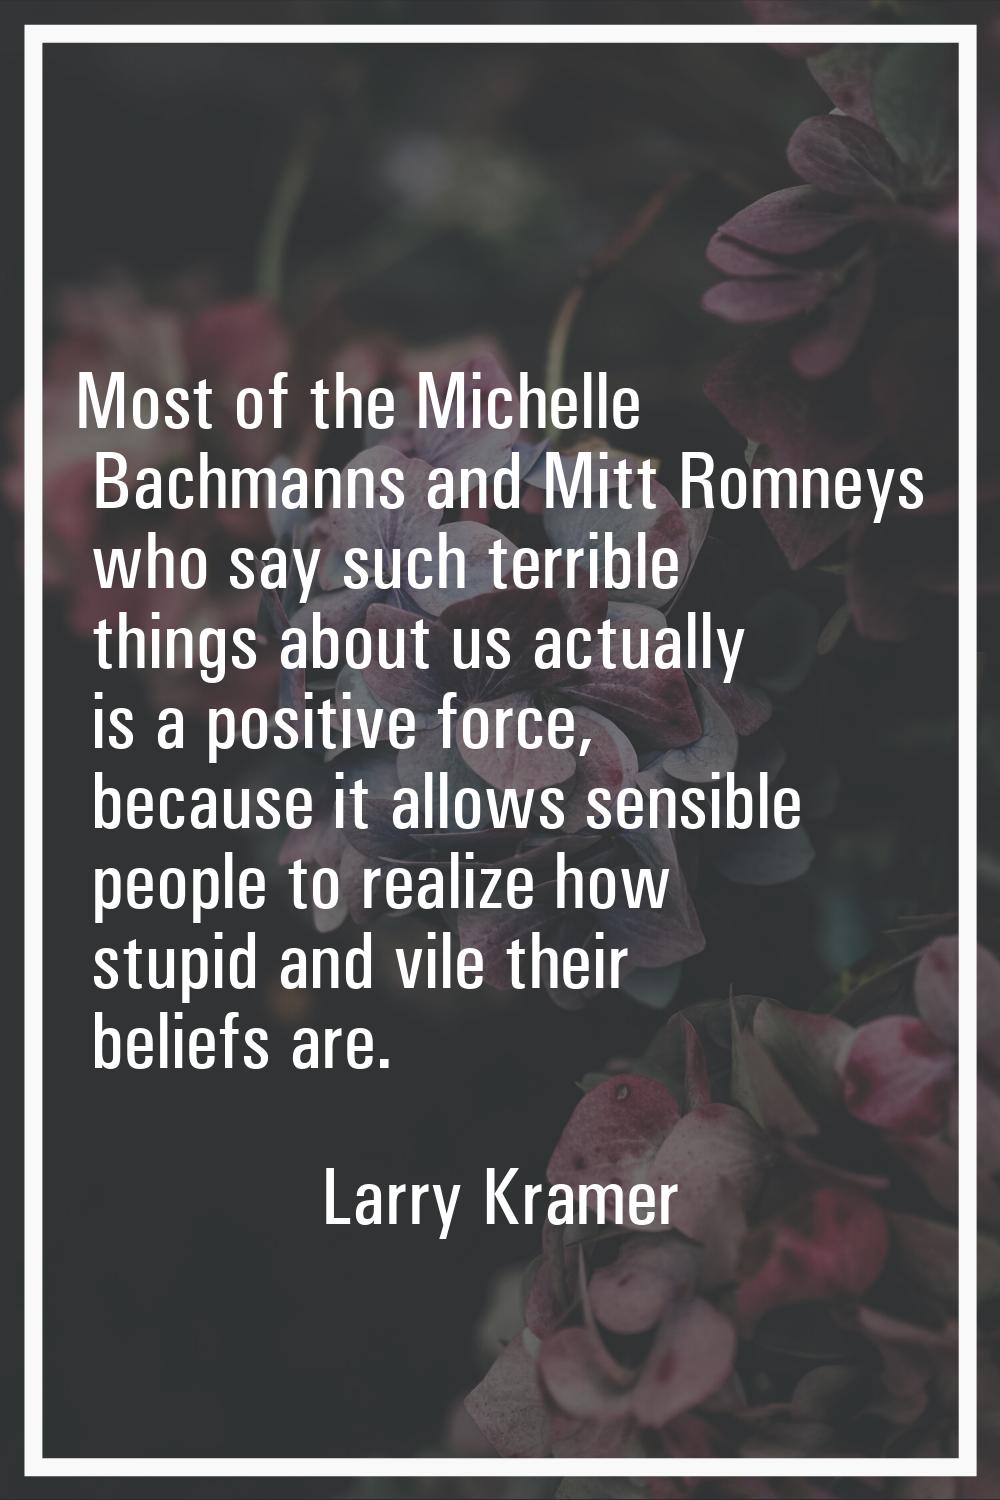 Most of the Michelle Bachmanns and Mitt Romneys who say such terrible things about us actually is a